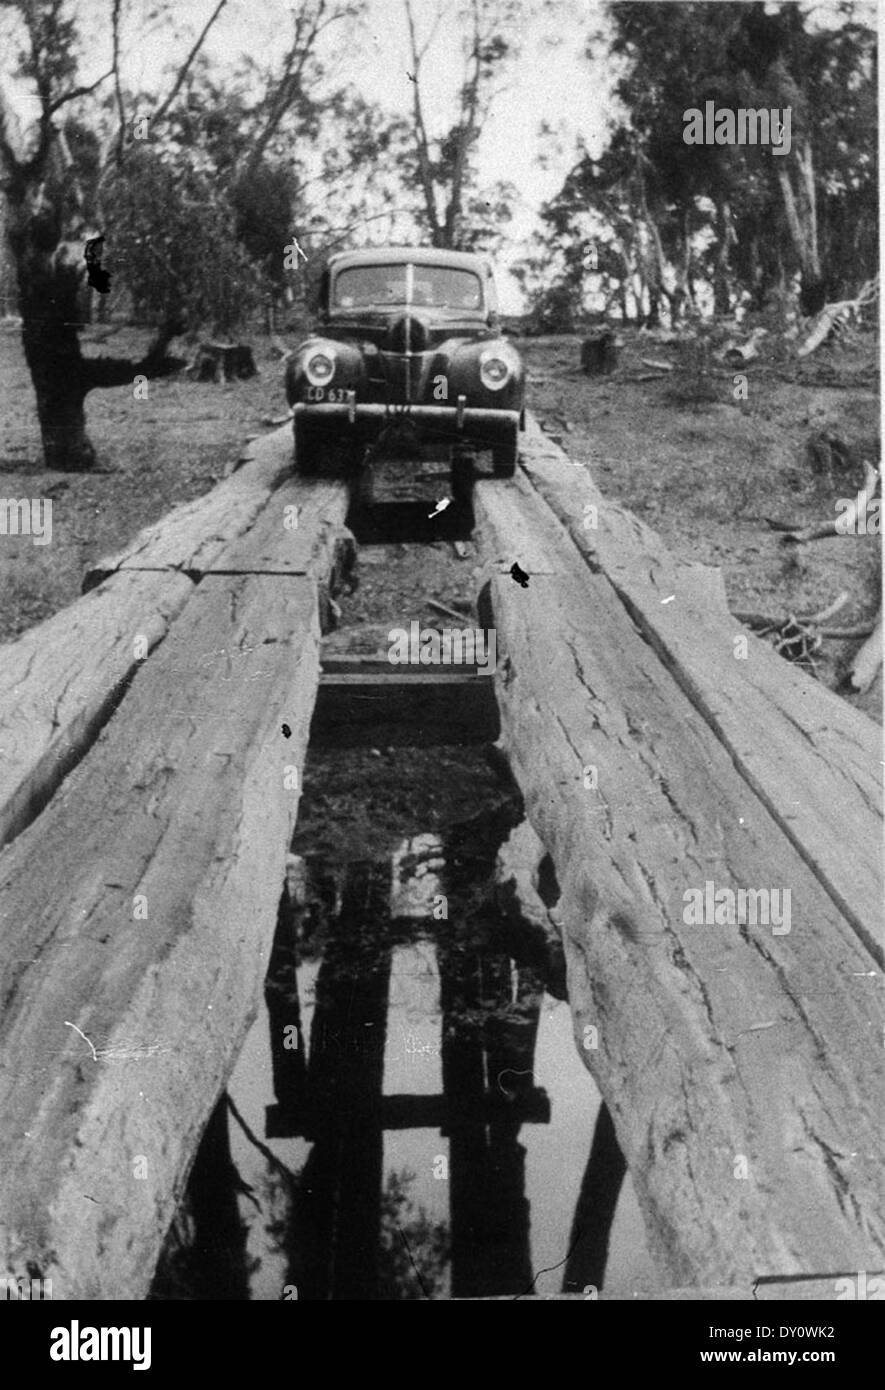 1940 Ford V-8 or Mercury car crossing Woolooma-Balpool bridge - Deniliquin, NSW, 1930 by Garry Daly Stock Photo